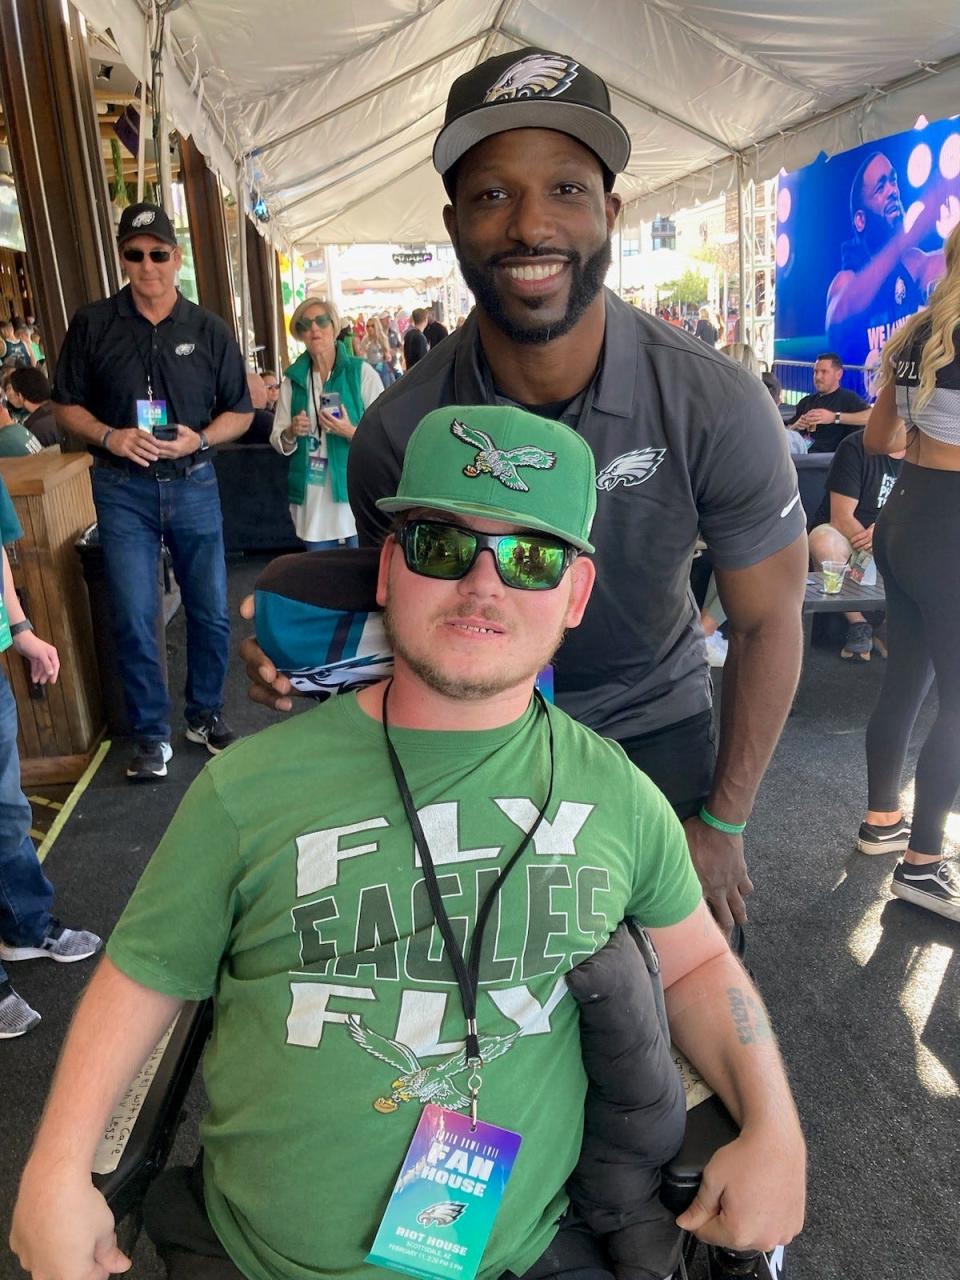 Austin Lauer (bottom) with former Philadelphia Eagles wide receiver Jason Avant at the Eagles' VIP tailgate party prior to Super Bowl LVII in Arizona.